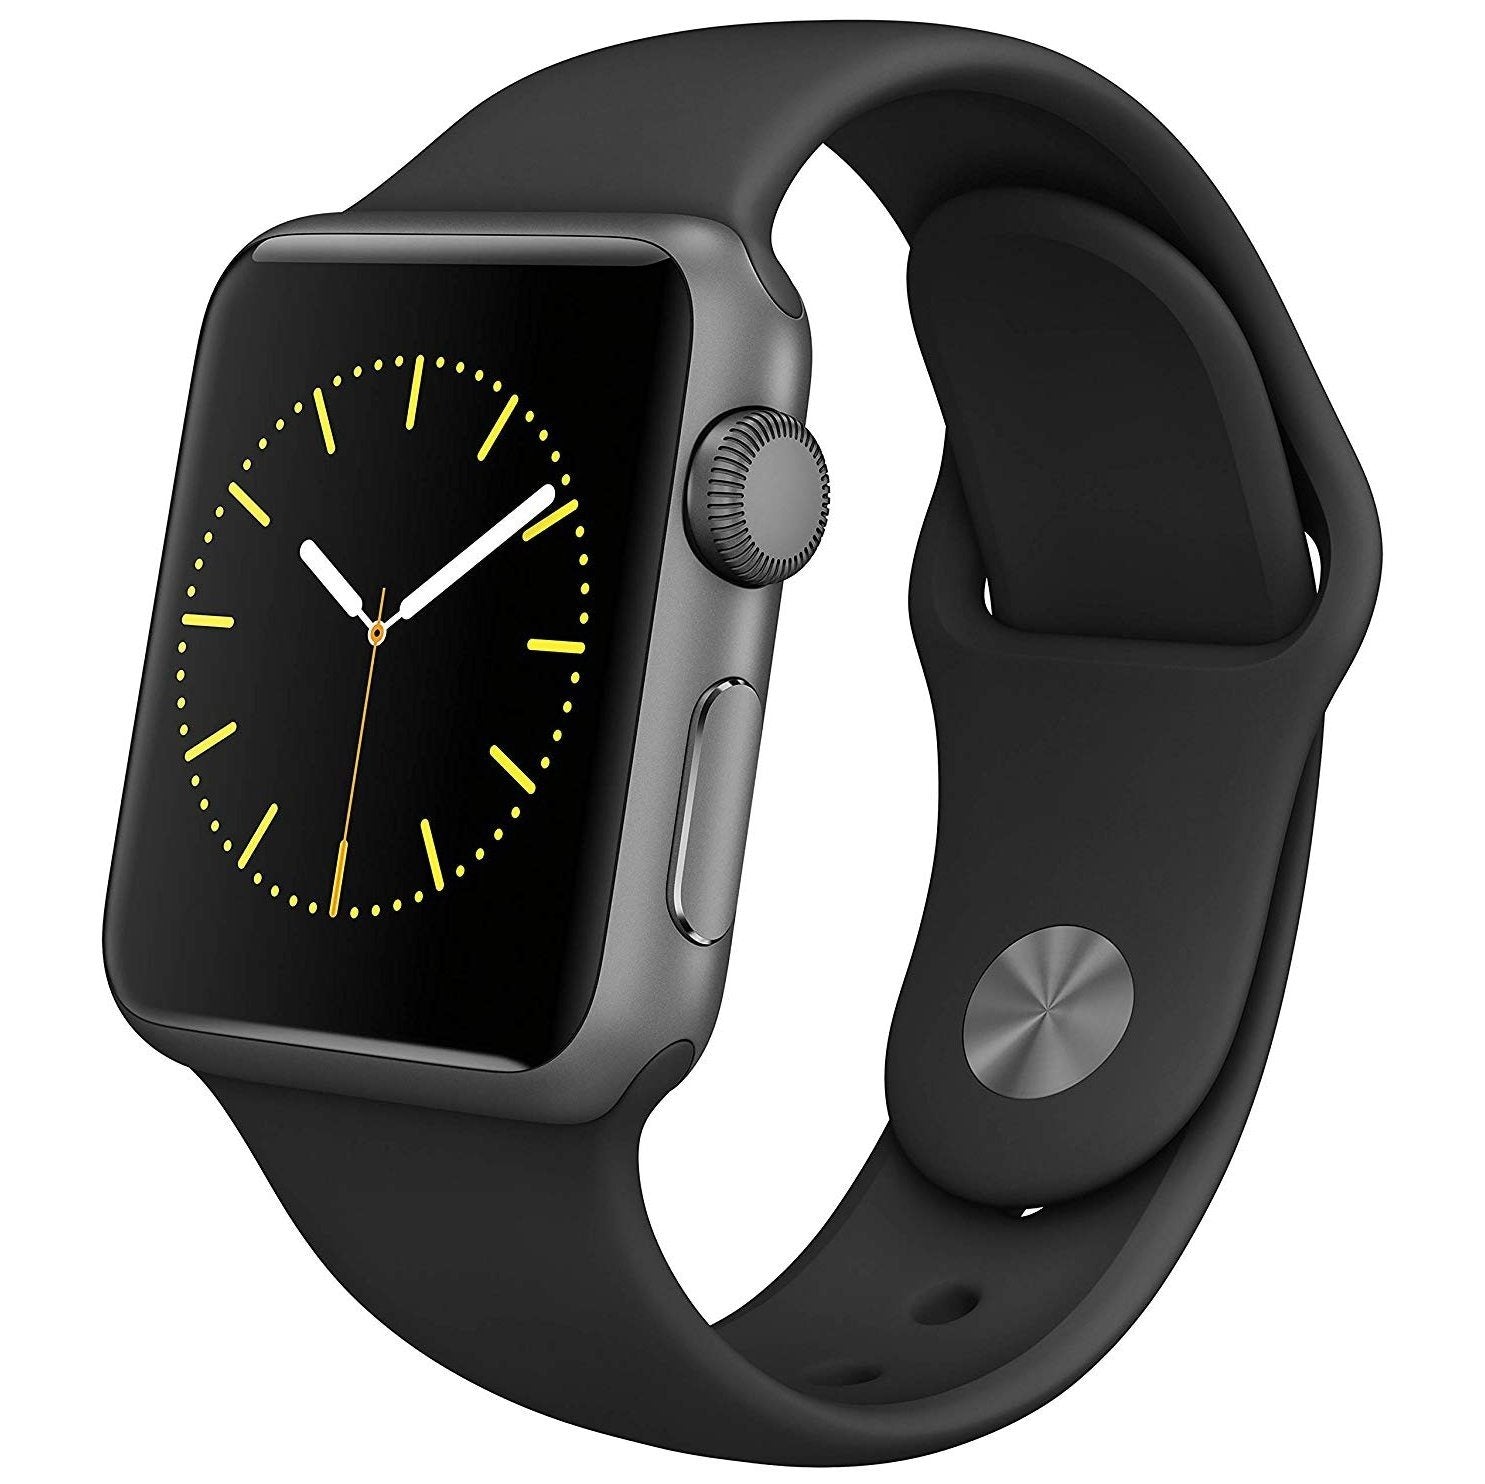 Apple Watch Smartwatch - Assorted Sizes and Colors / Black / 42mm